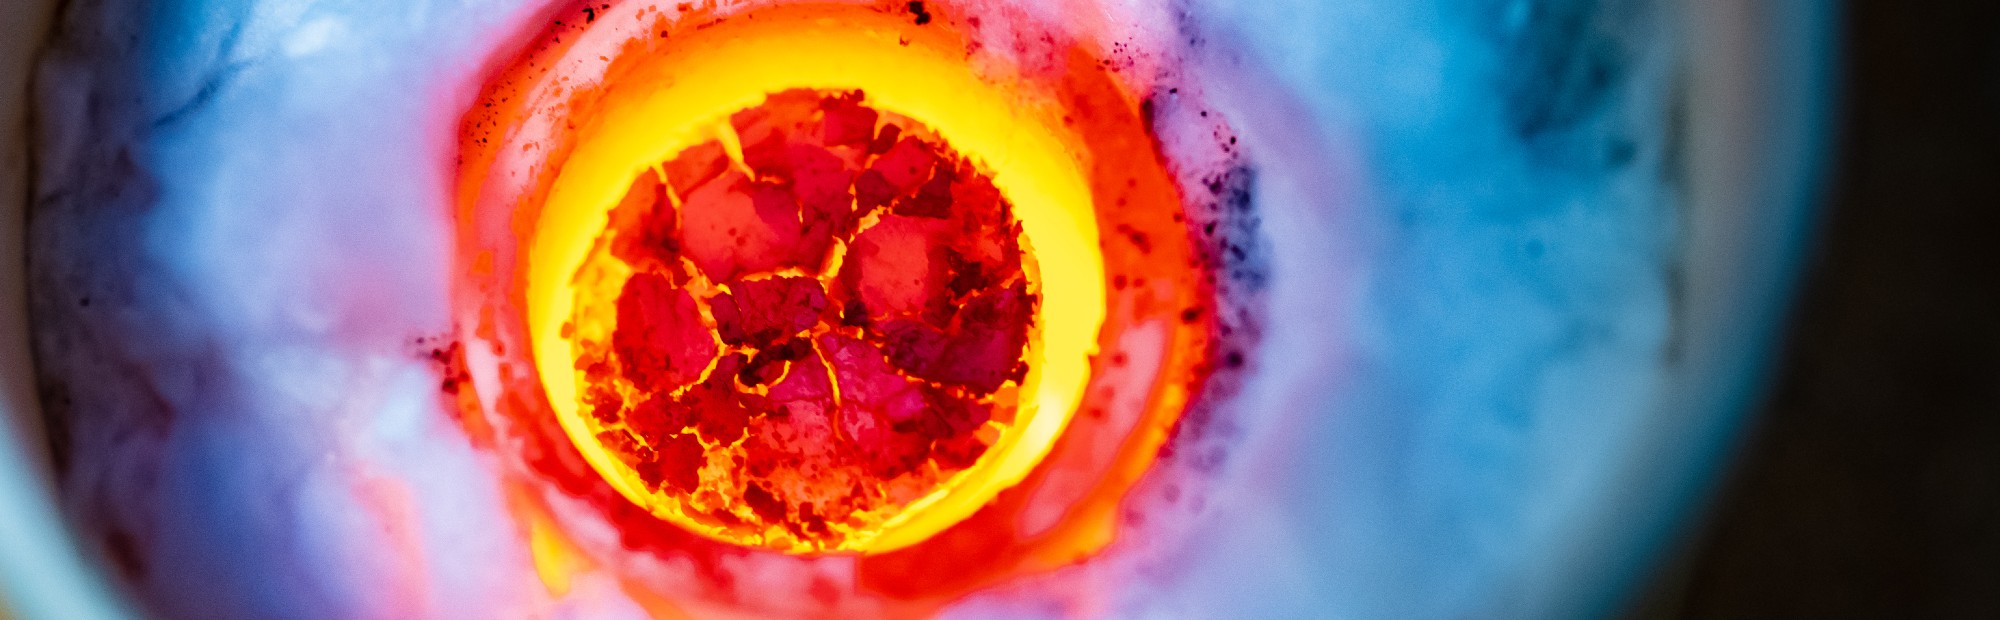 Vibrant red and yellow molten steel in a crucible.